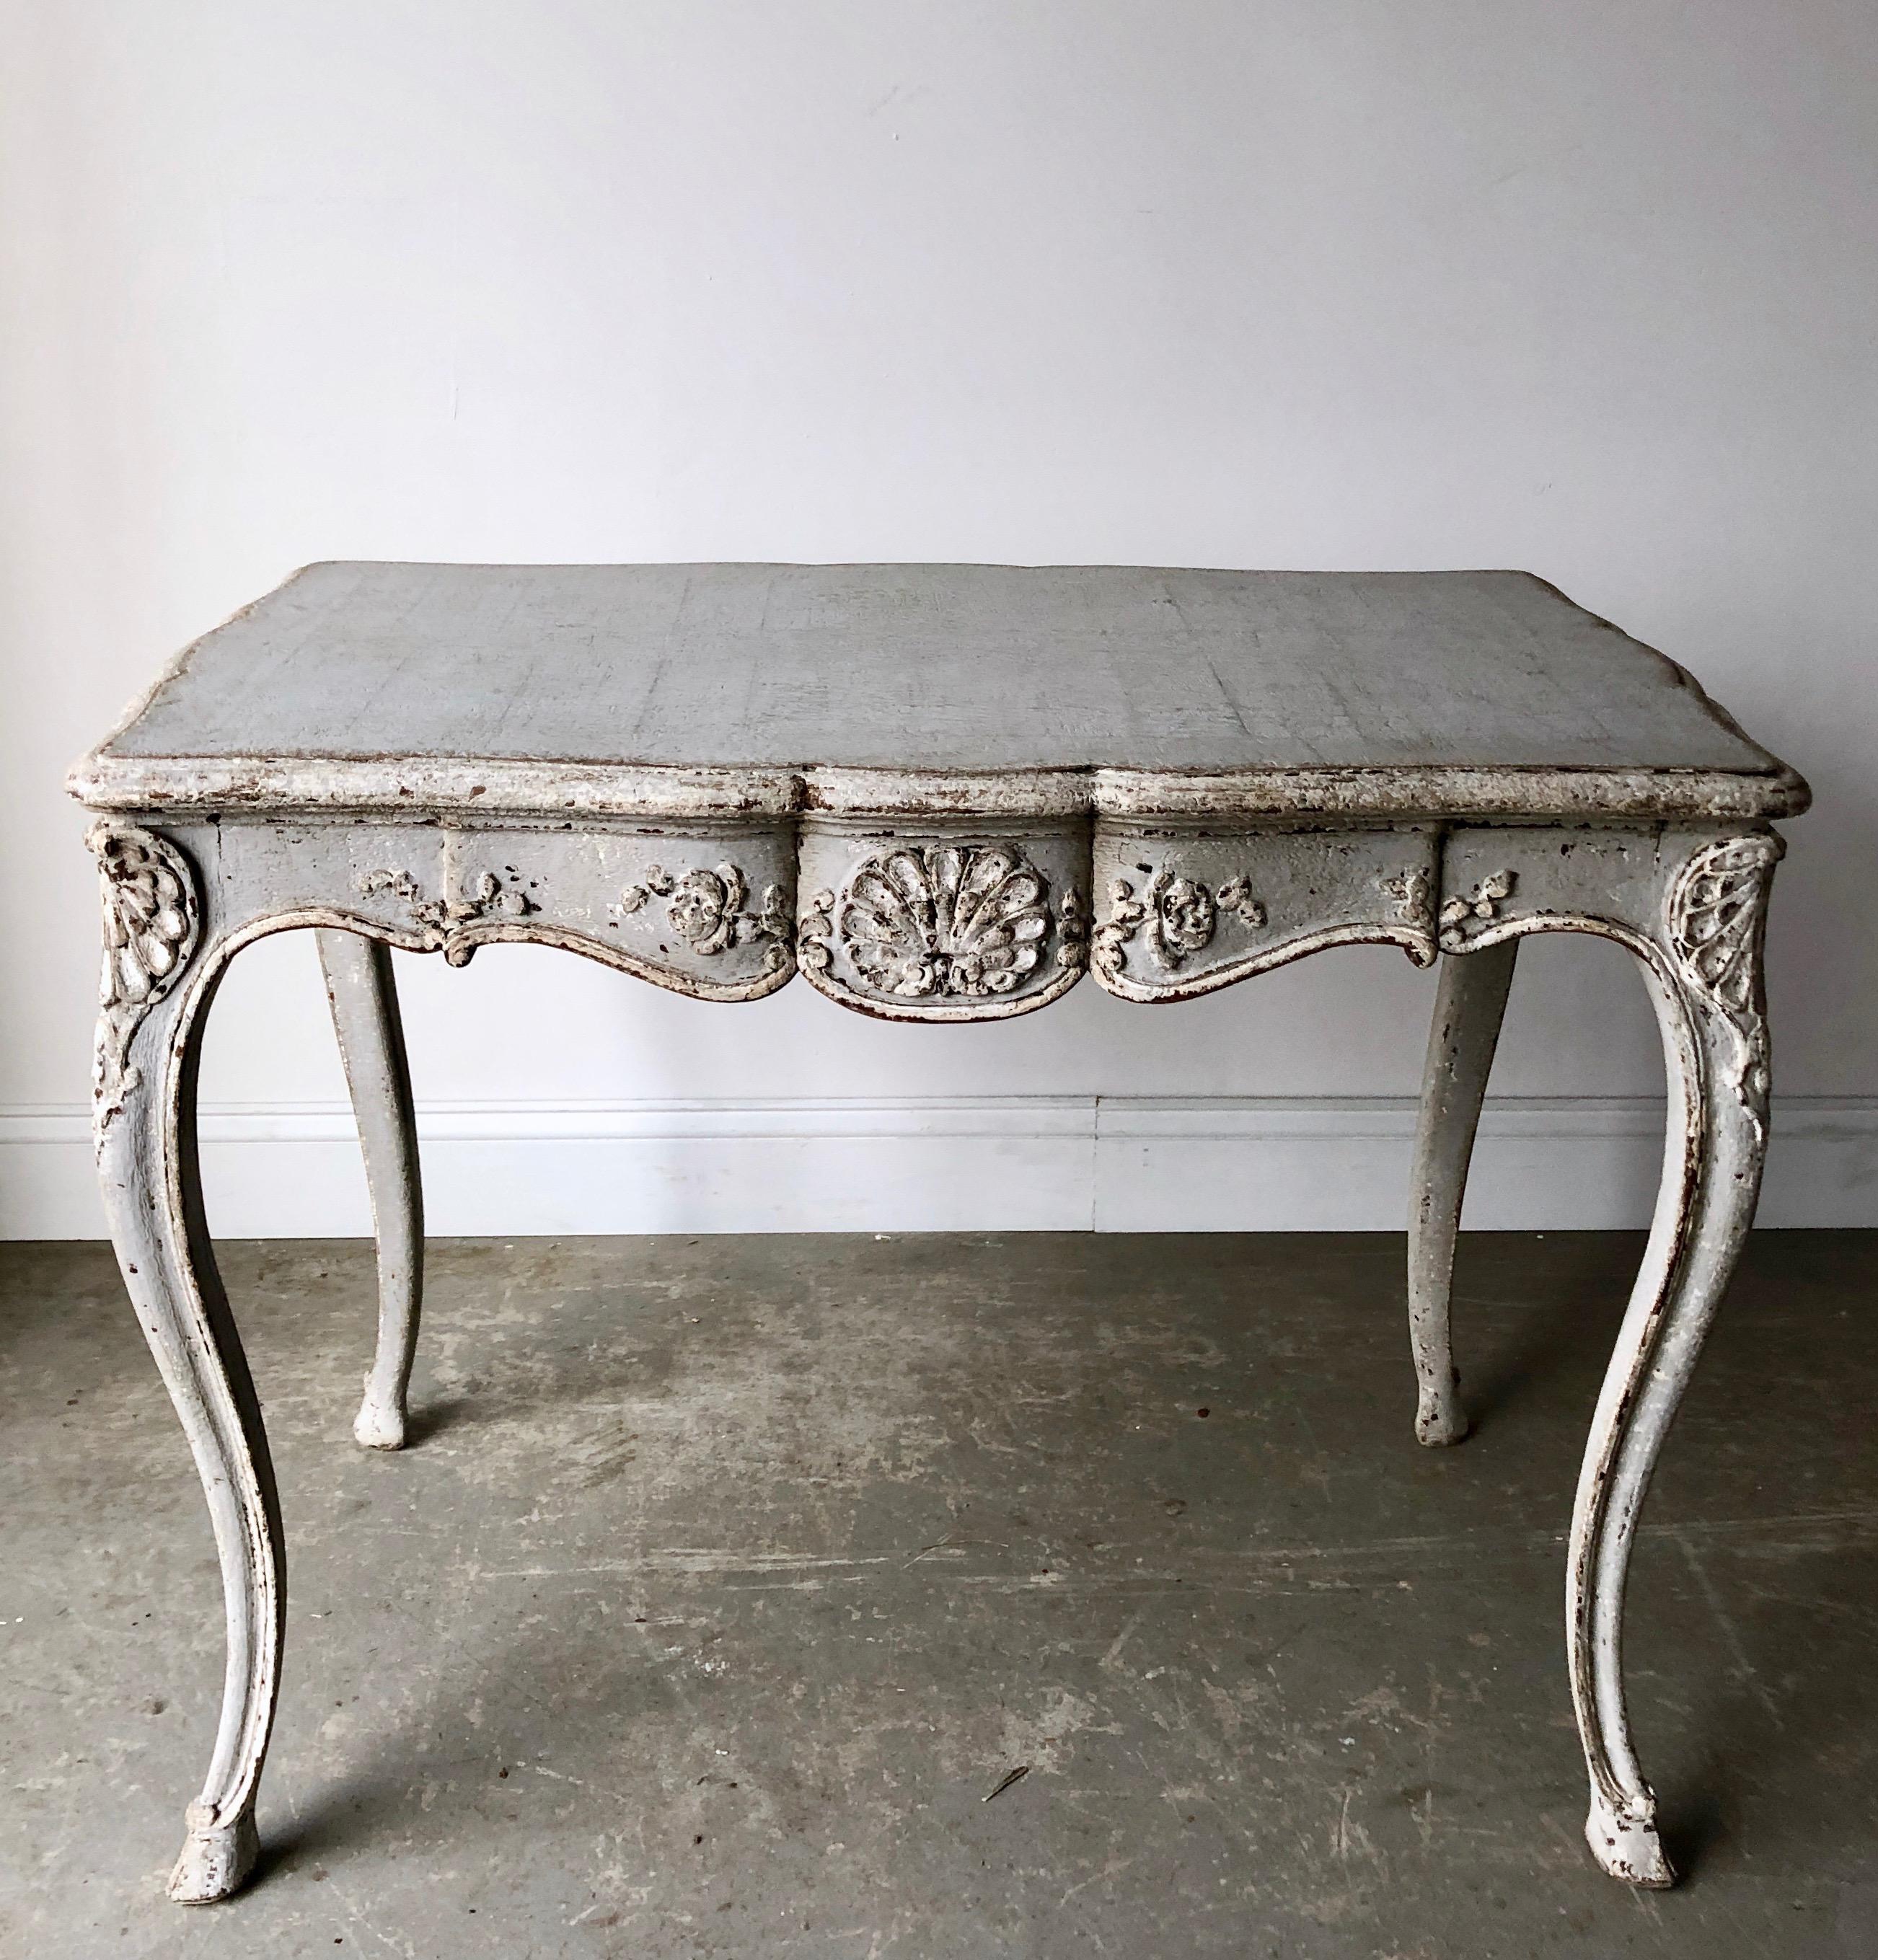 A charming 19th century Louis XV style table/centre/desk has slender cabriole legs with carved knees, and a carved flower motif centring sides of shaped apron. One drawer on one front apron.
Surprising pieces and objects, authentic, decorative and